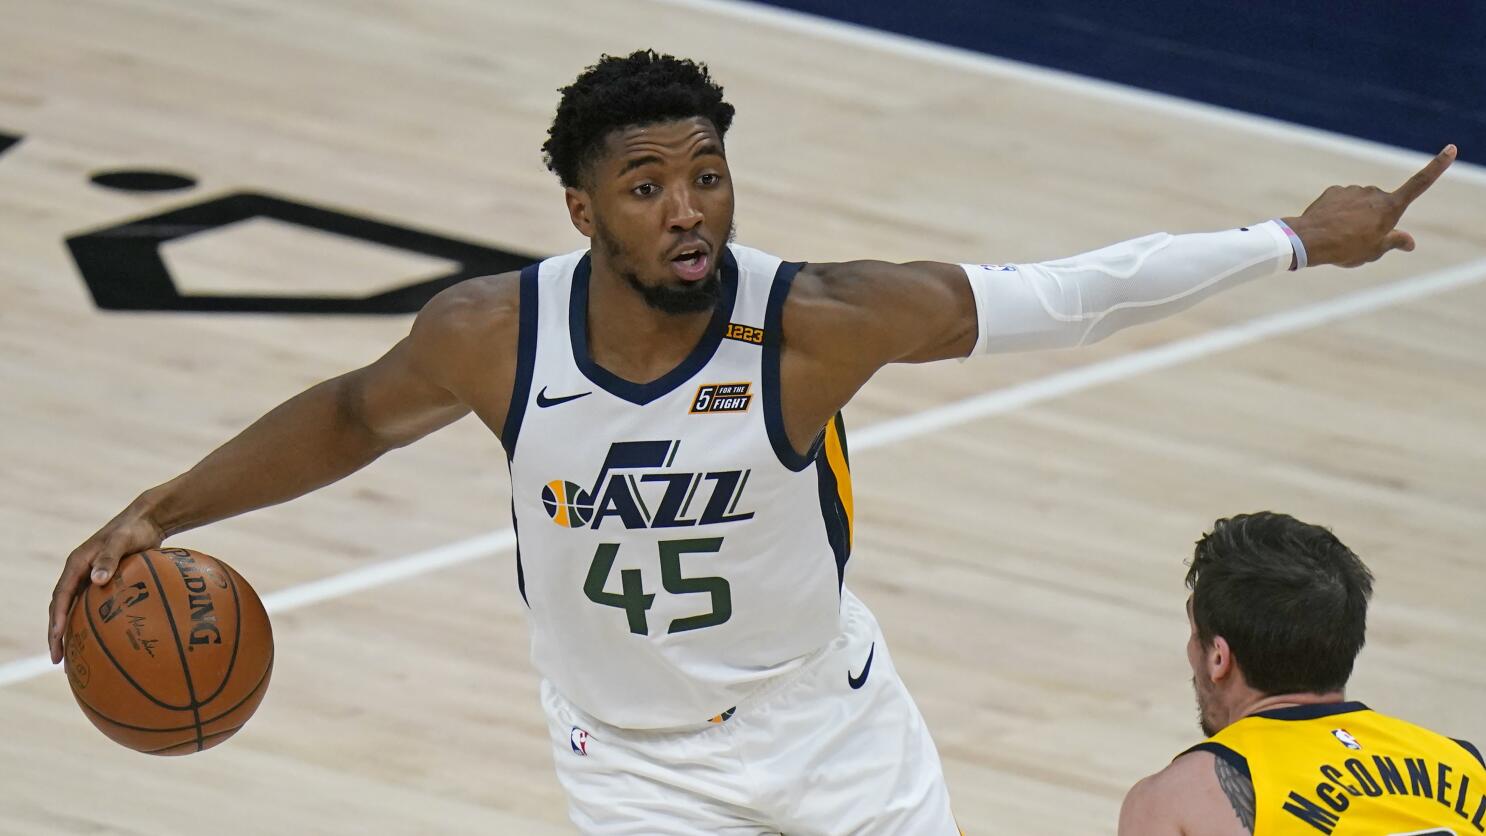 Donovan Mitchell Season Review: Best campaign of career, but still